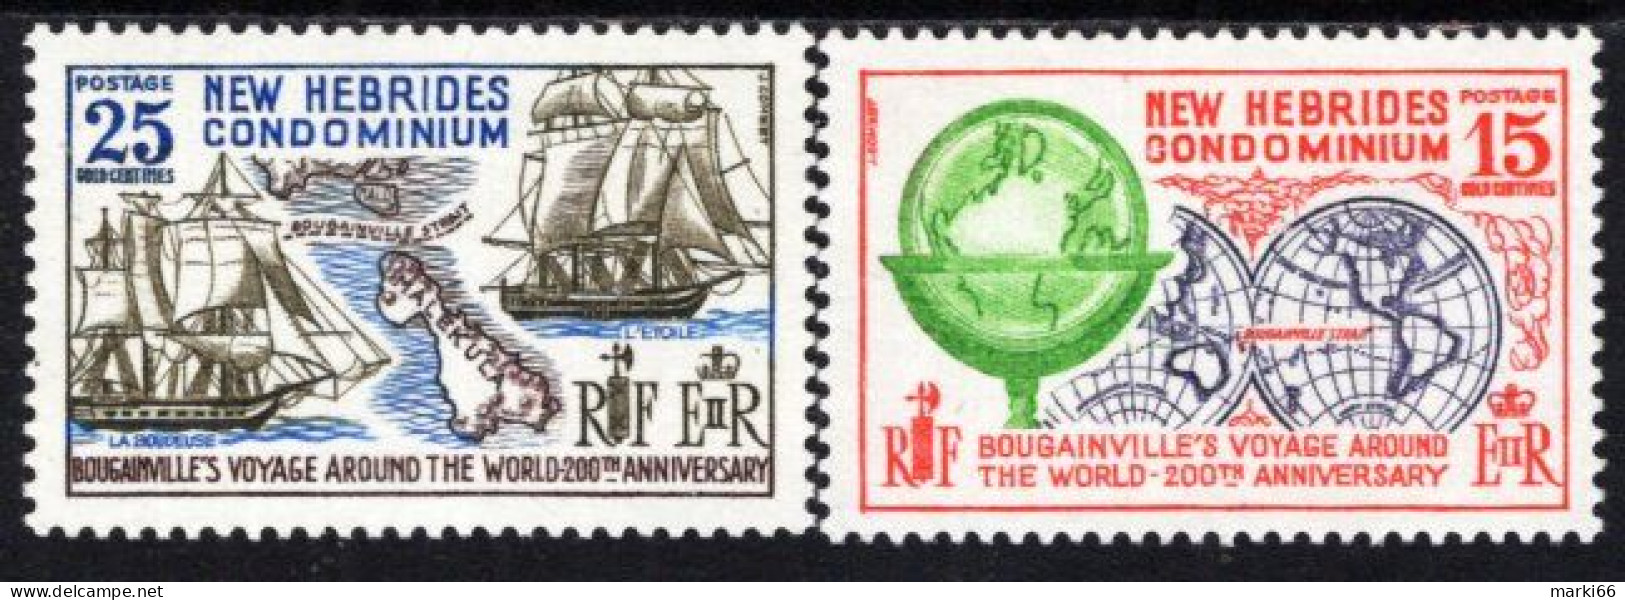 New Hebrides - 1968 - 200th Anniversary Of The Circumnavigation By Bougainville - Mint Stamp Set - Ungebraucht